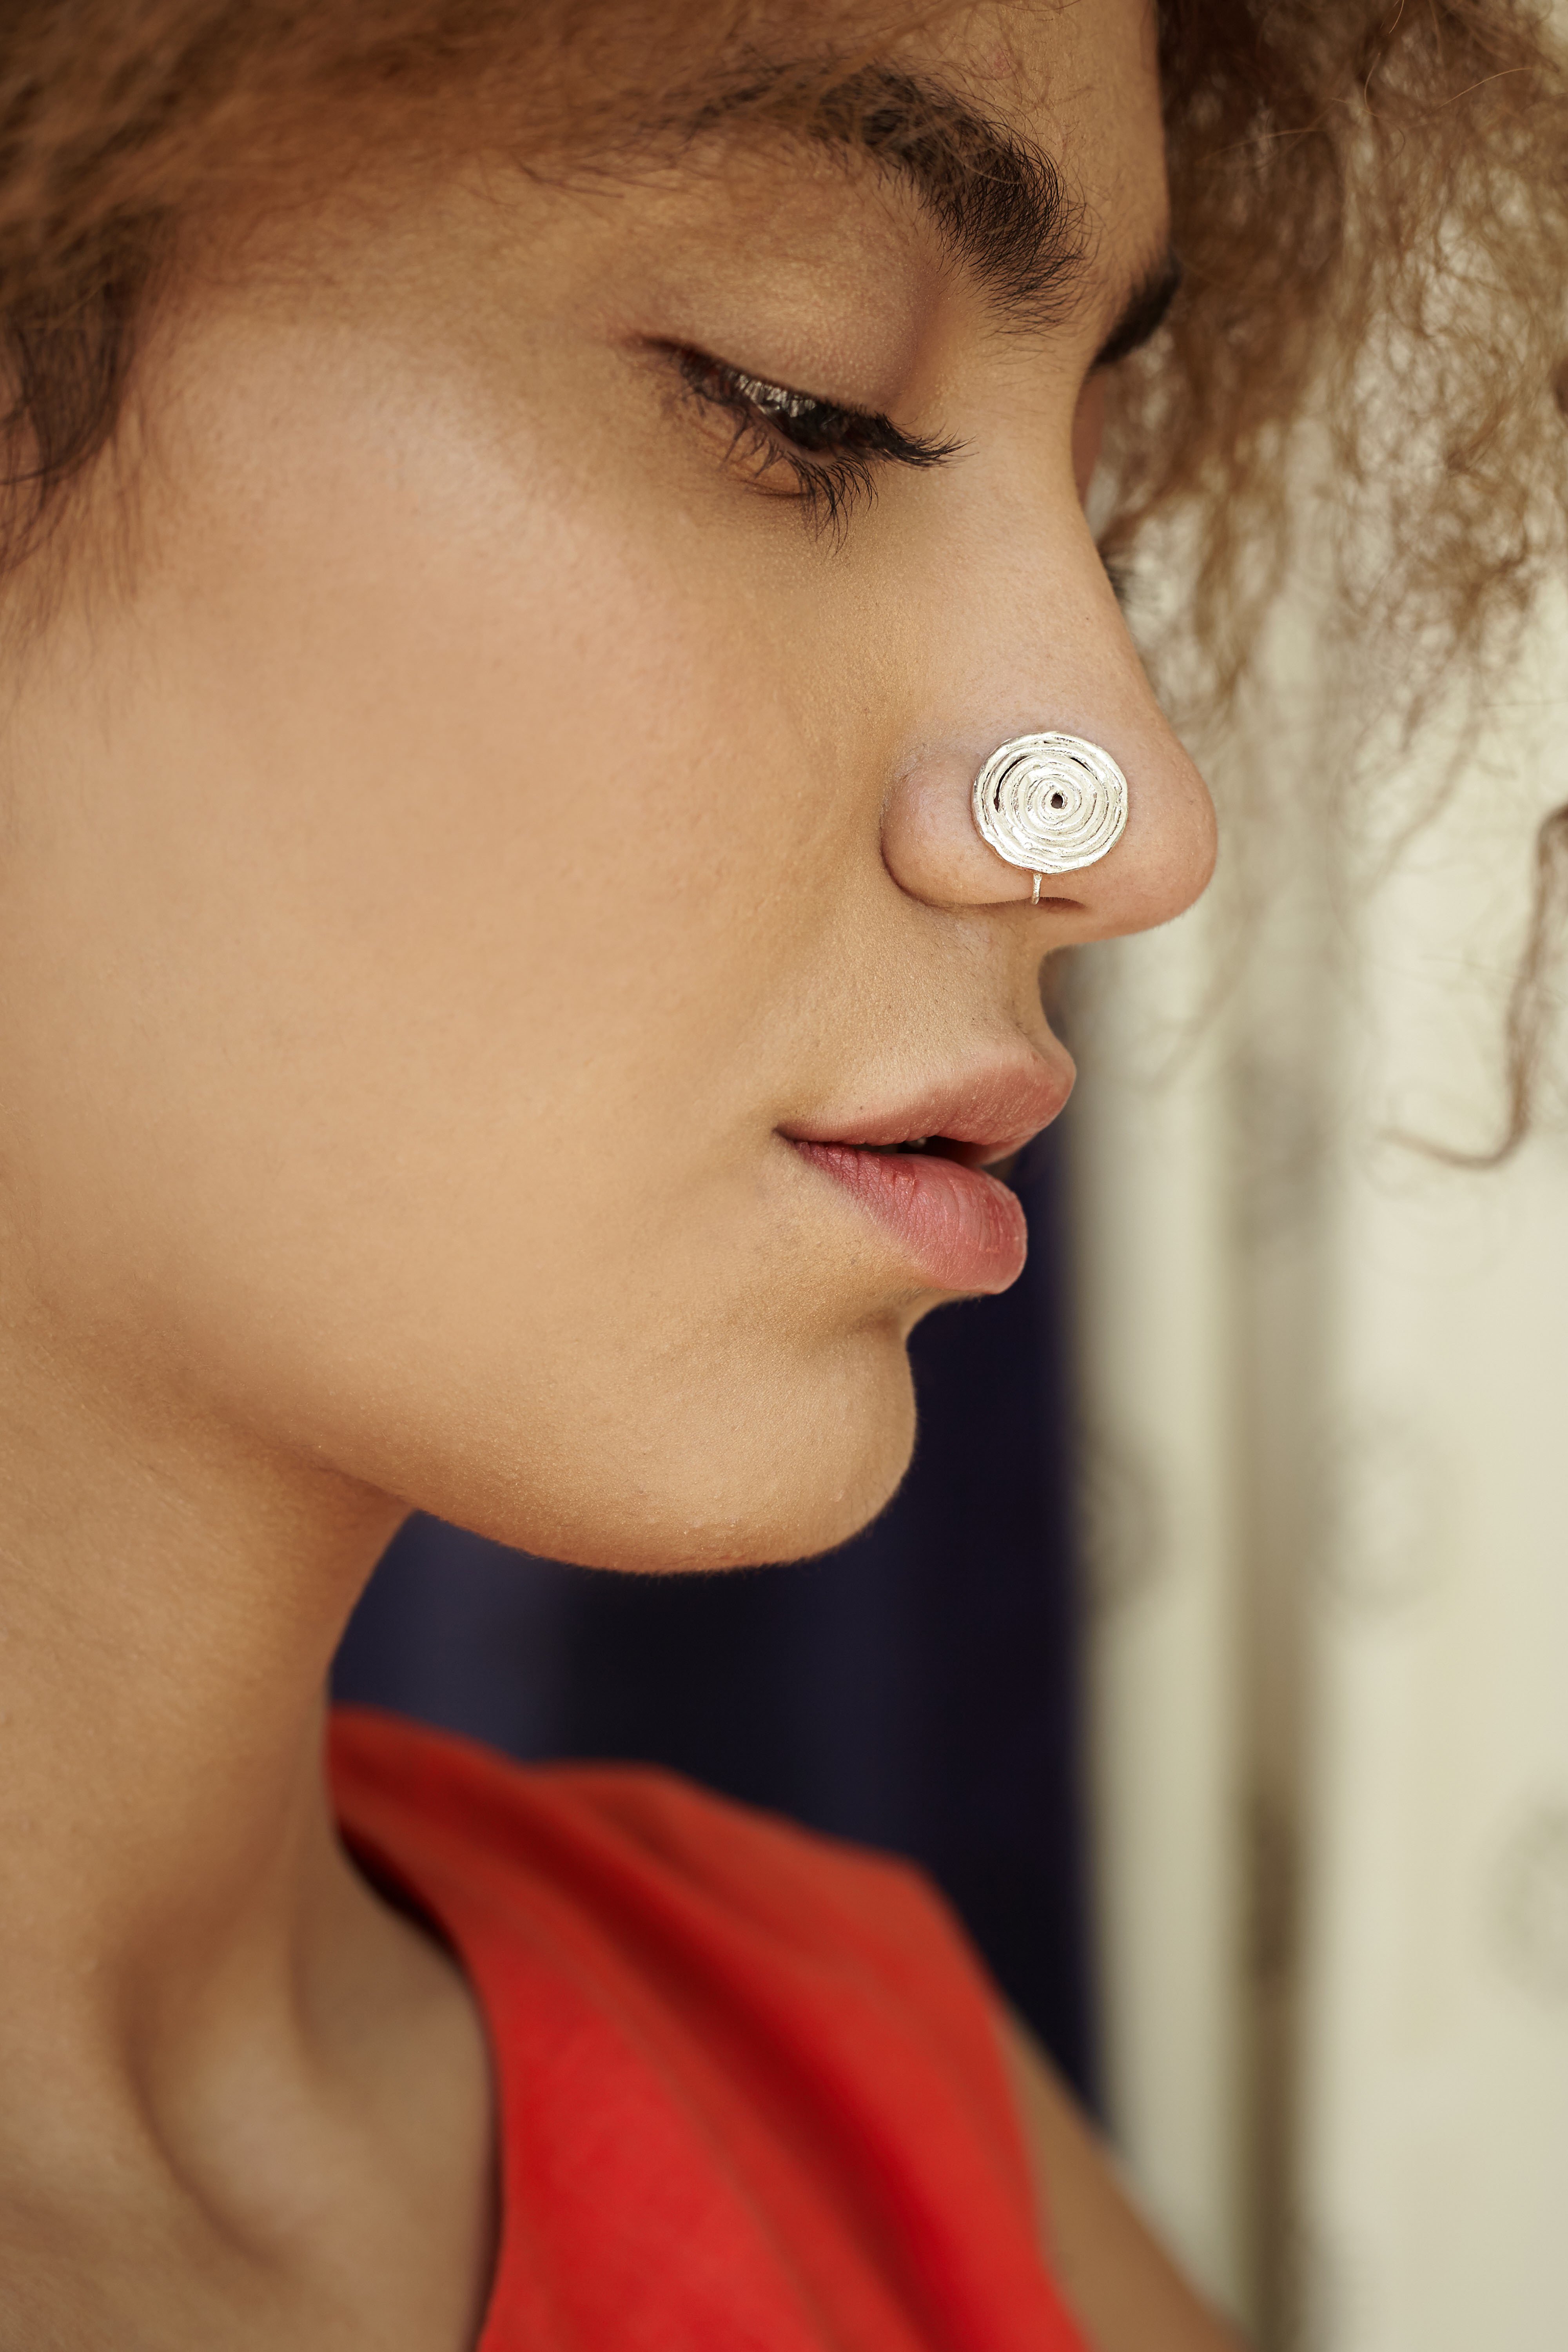 15 Beautiful Nose Pins You Can Try That Don’t Even Require A Piercing